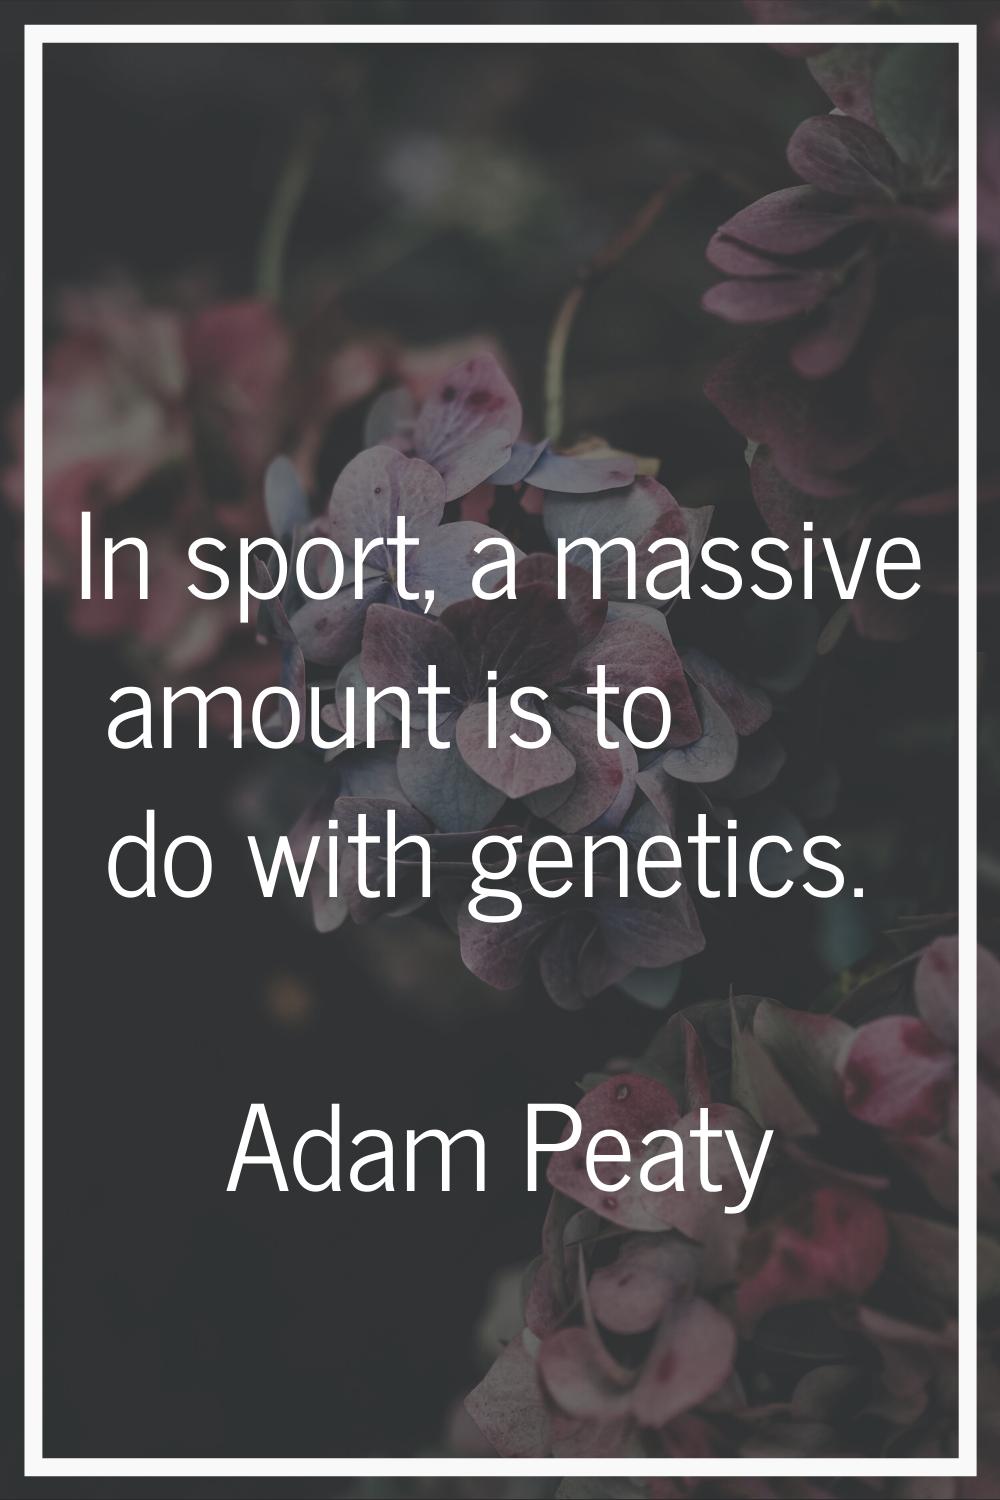 In sport, a massive amount is to do with genetics.